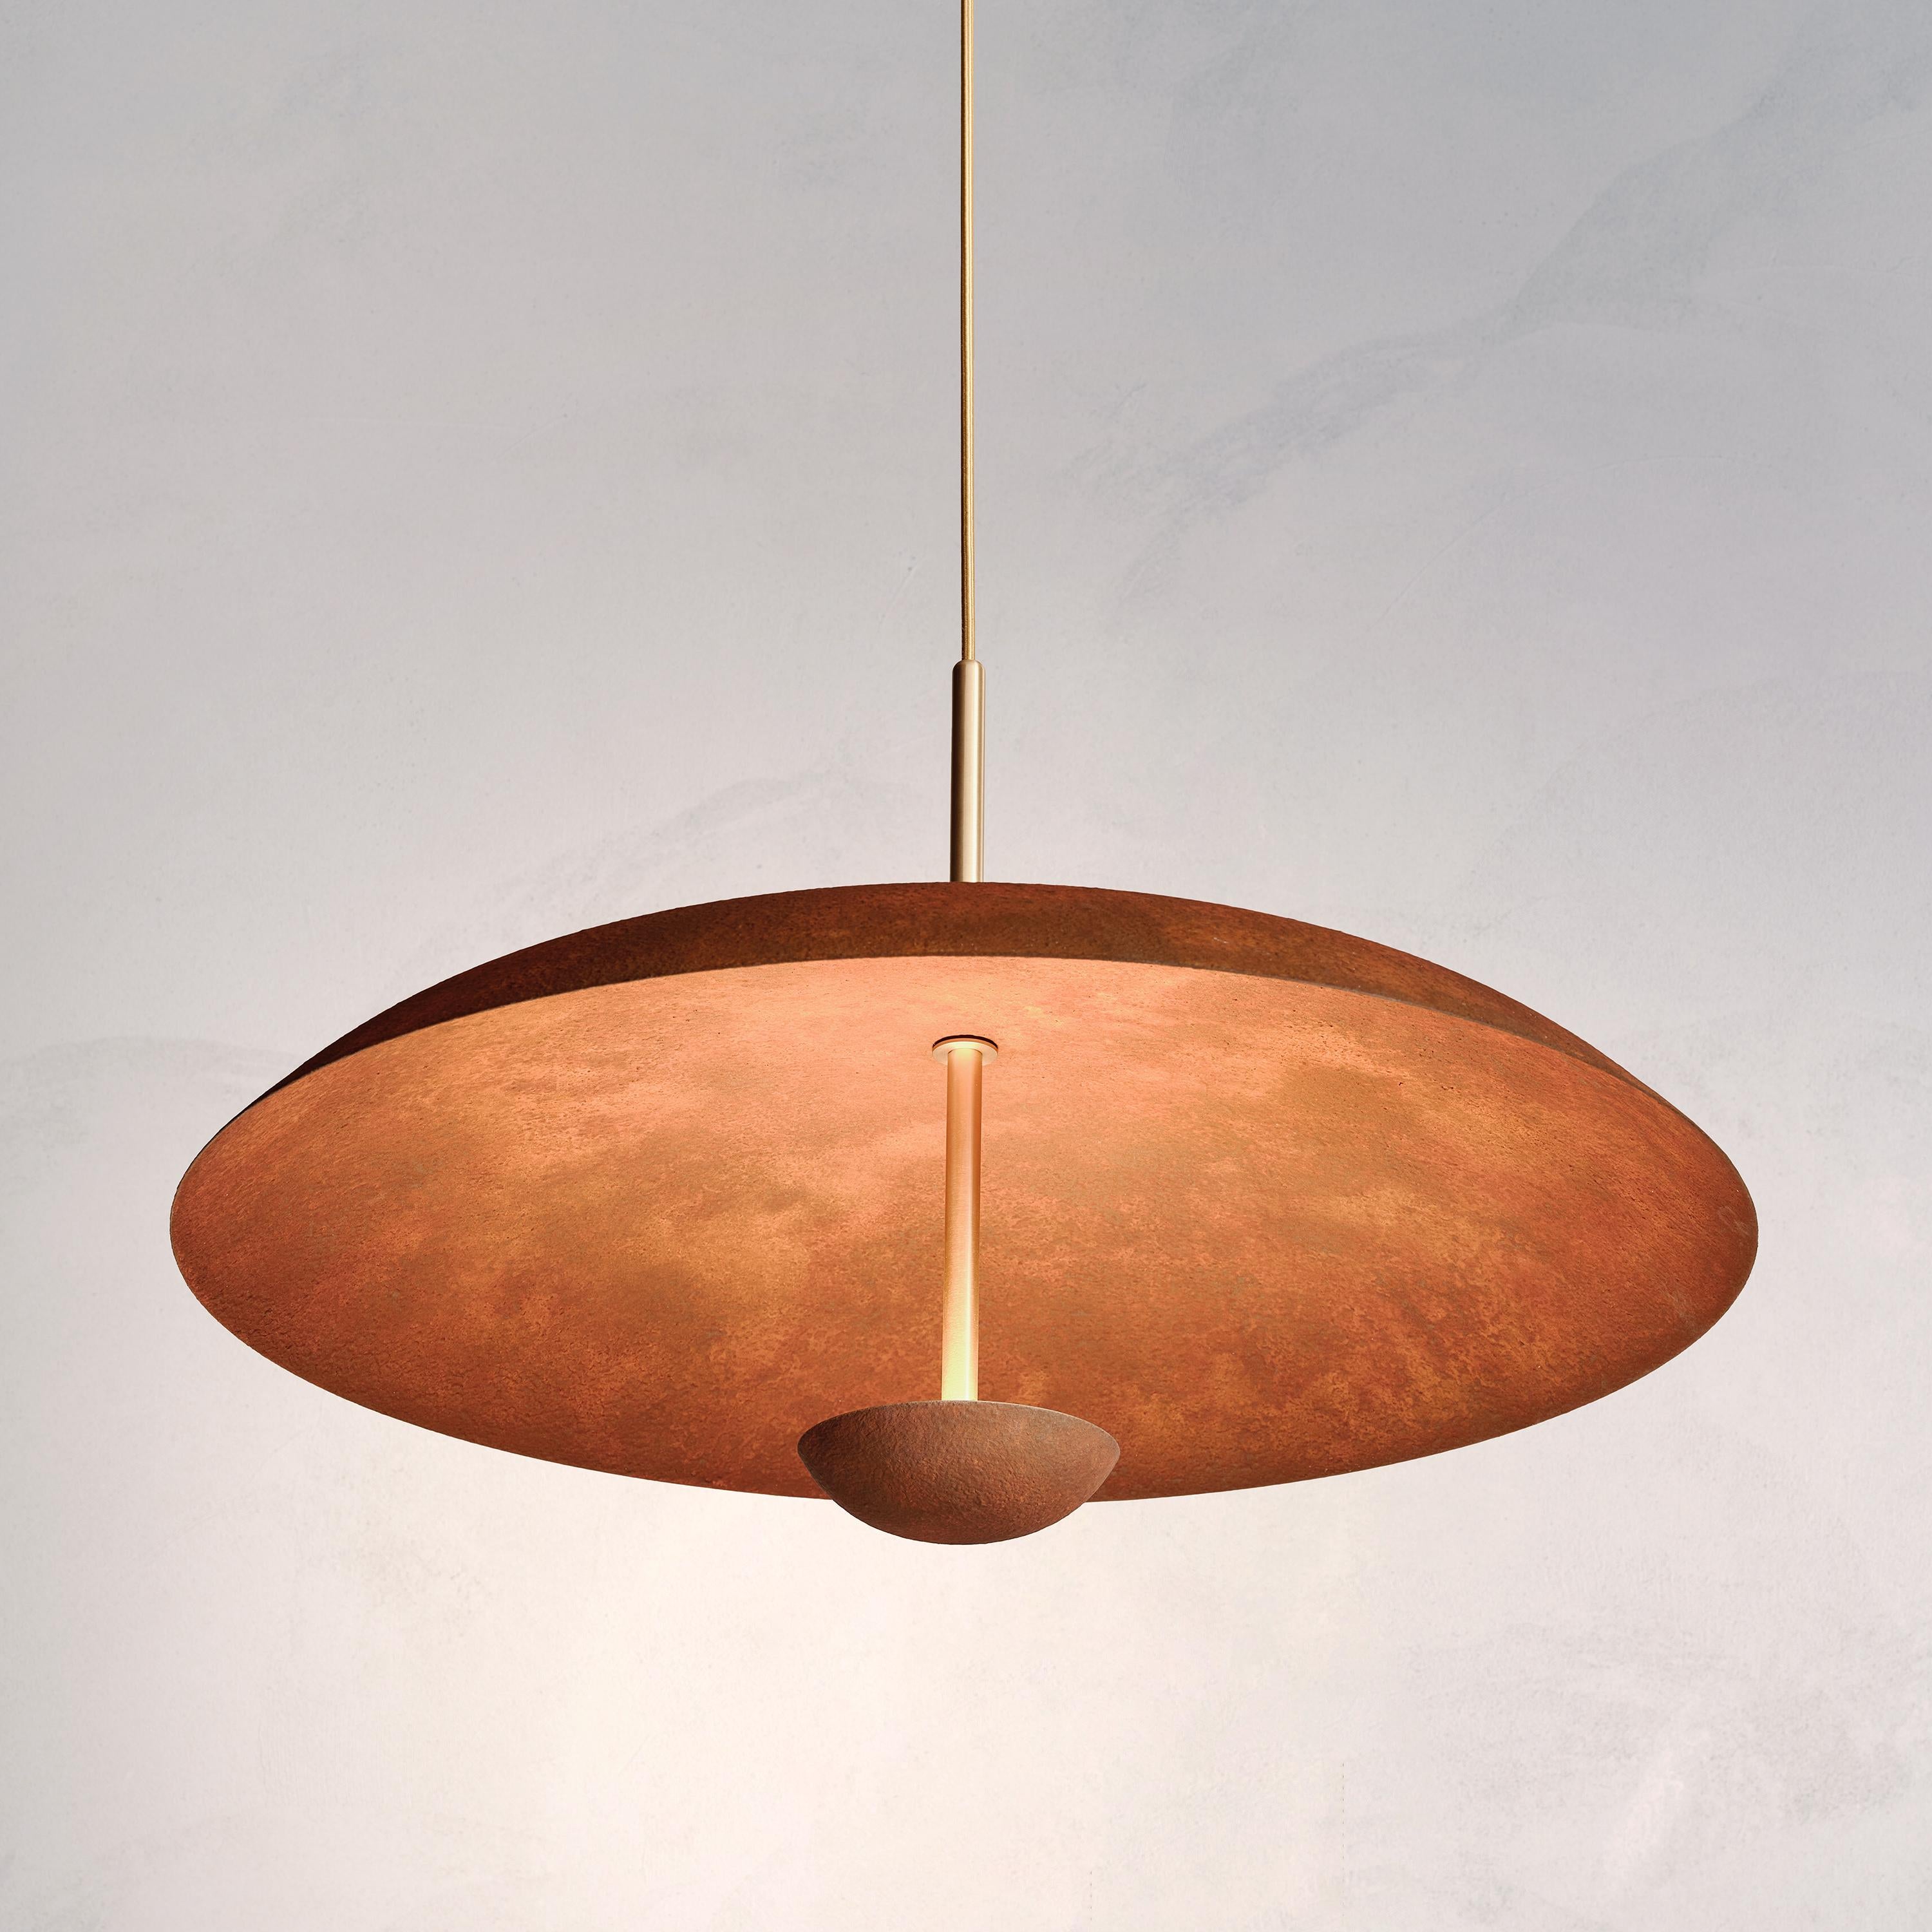 Two finely hand-spun brass plates make up this pendant light, finished in a mixed rust patina to create this unique appearance. Light is projected into the shade before reflecting out, illuminating its surrounding space without creating any glare.
